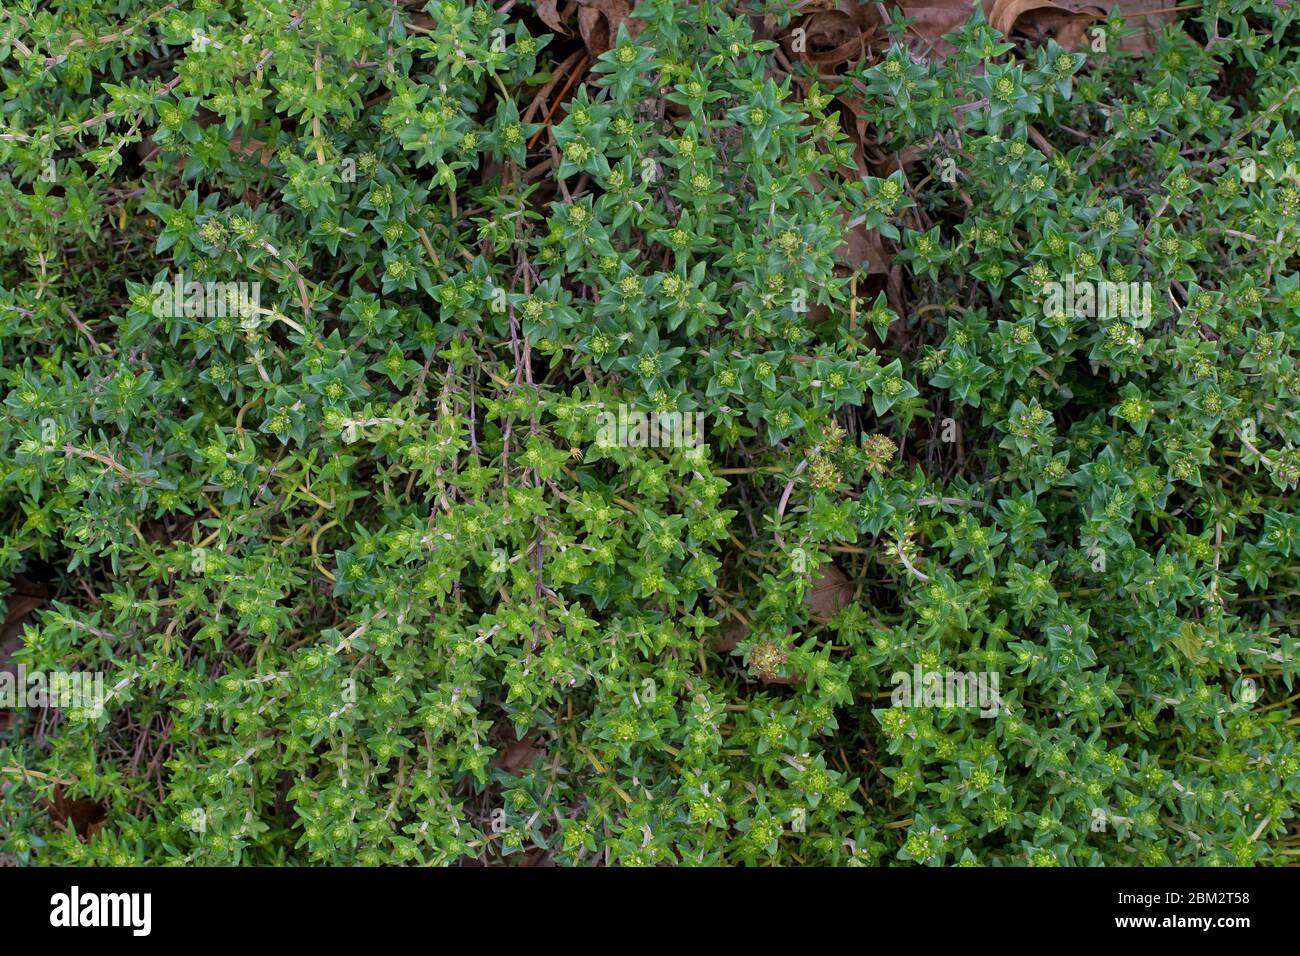 Thyme in the garden on a cloudy day. It is a member of the genus Thymus of aromatic perennial evergreen herbs in the mint family. Stock Photo